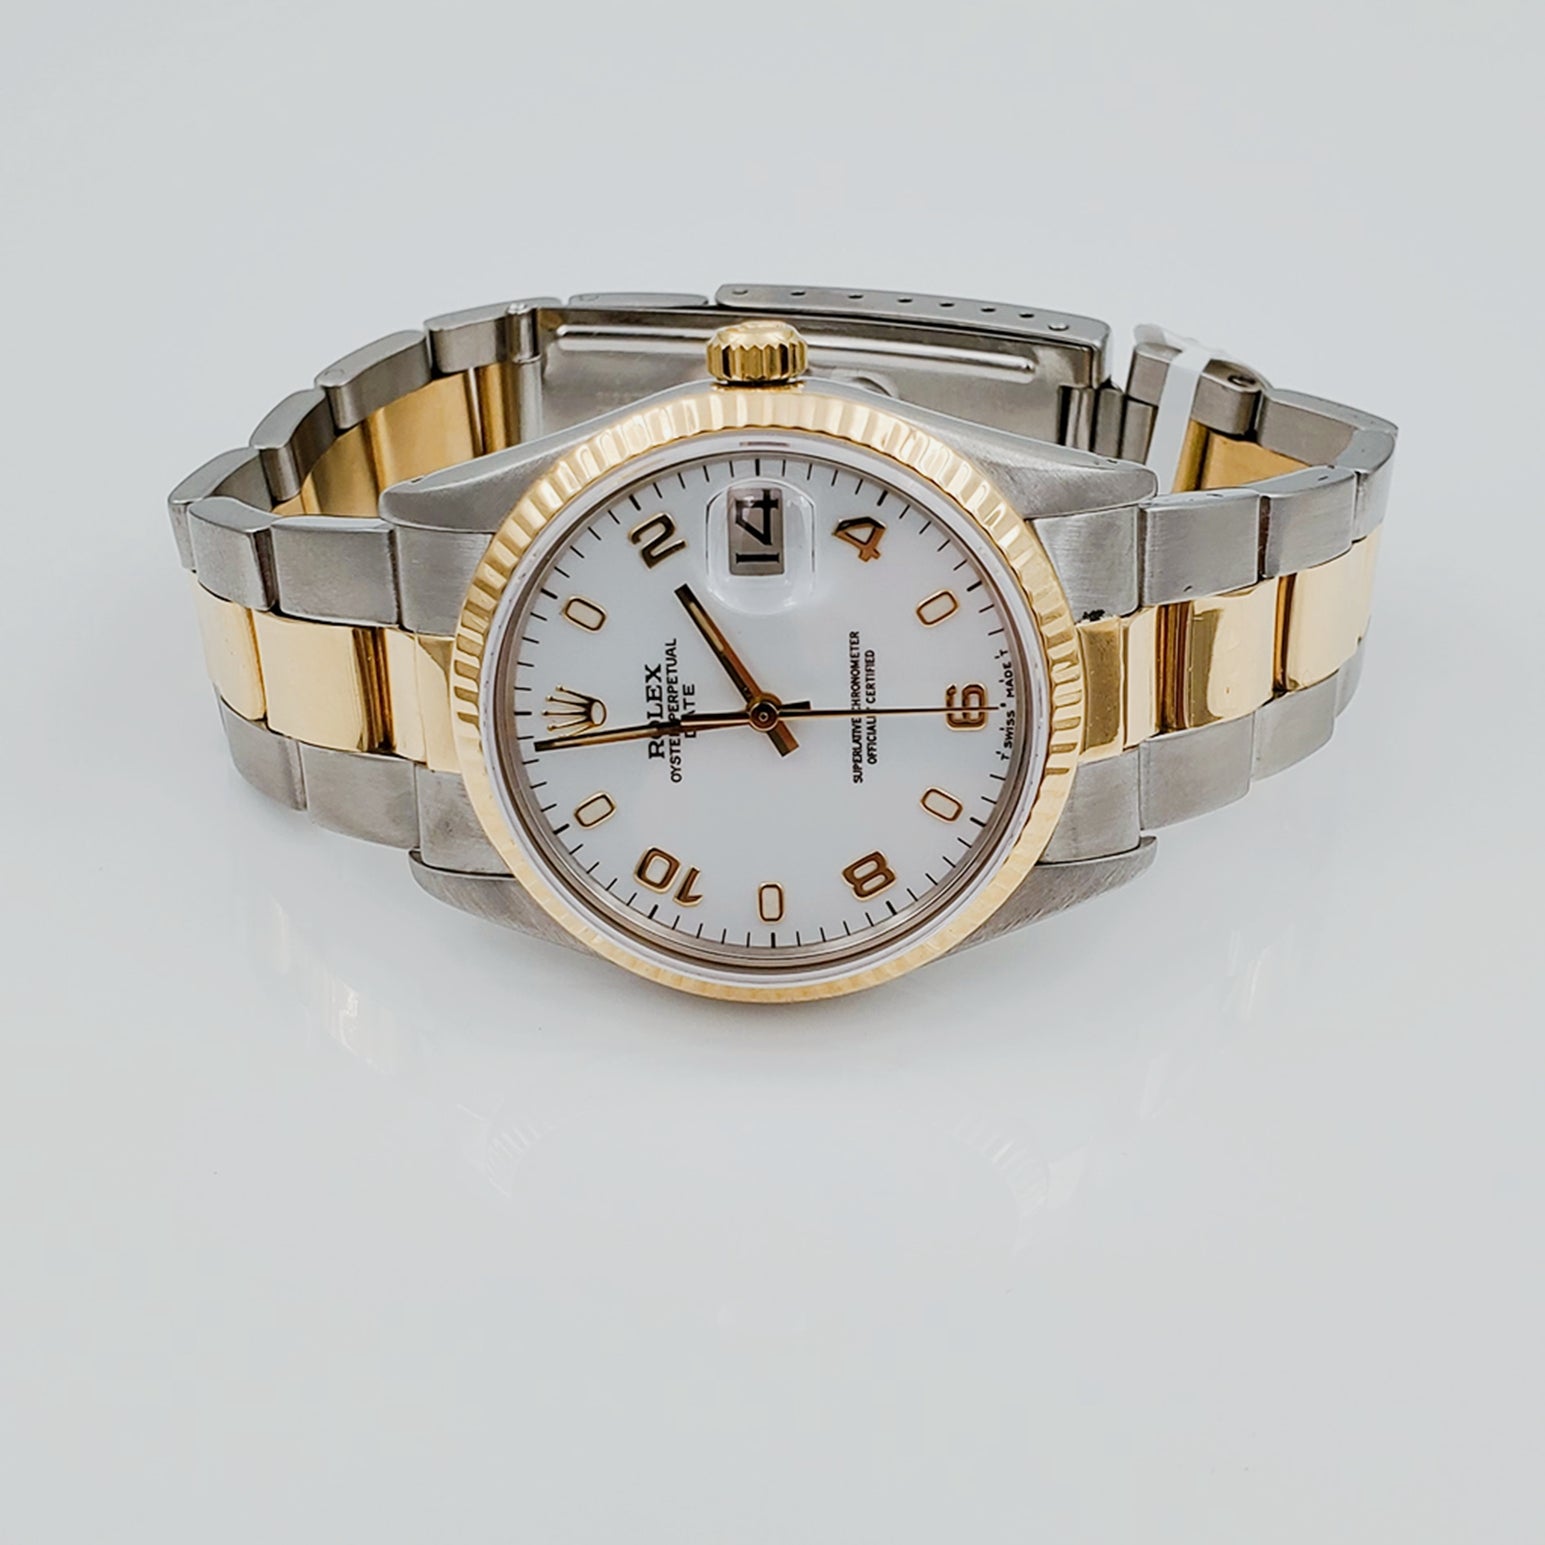 Unisex Rolex DateJust 34mm Two Tone 18k Gold / Stainless Steel Oyster Band Watch with White Dial, Gold Numeral and Fluted Bezel. (Pre-Owned)